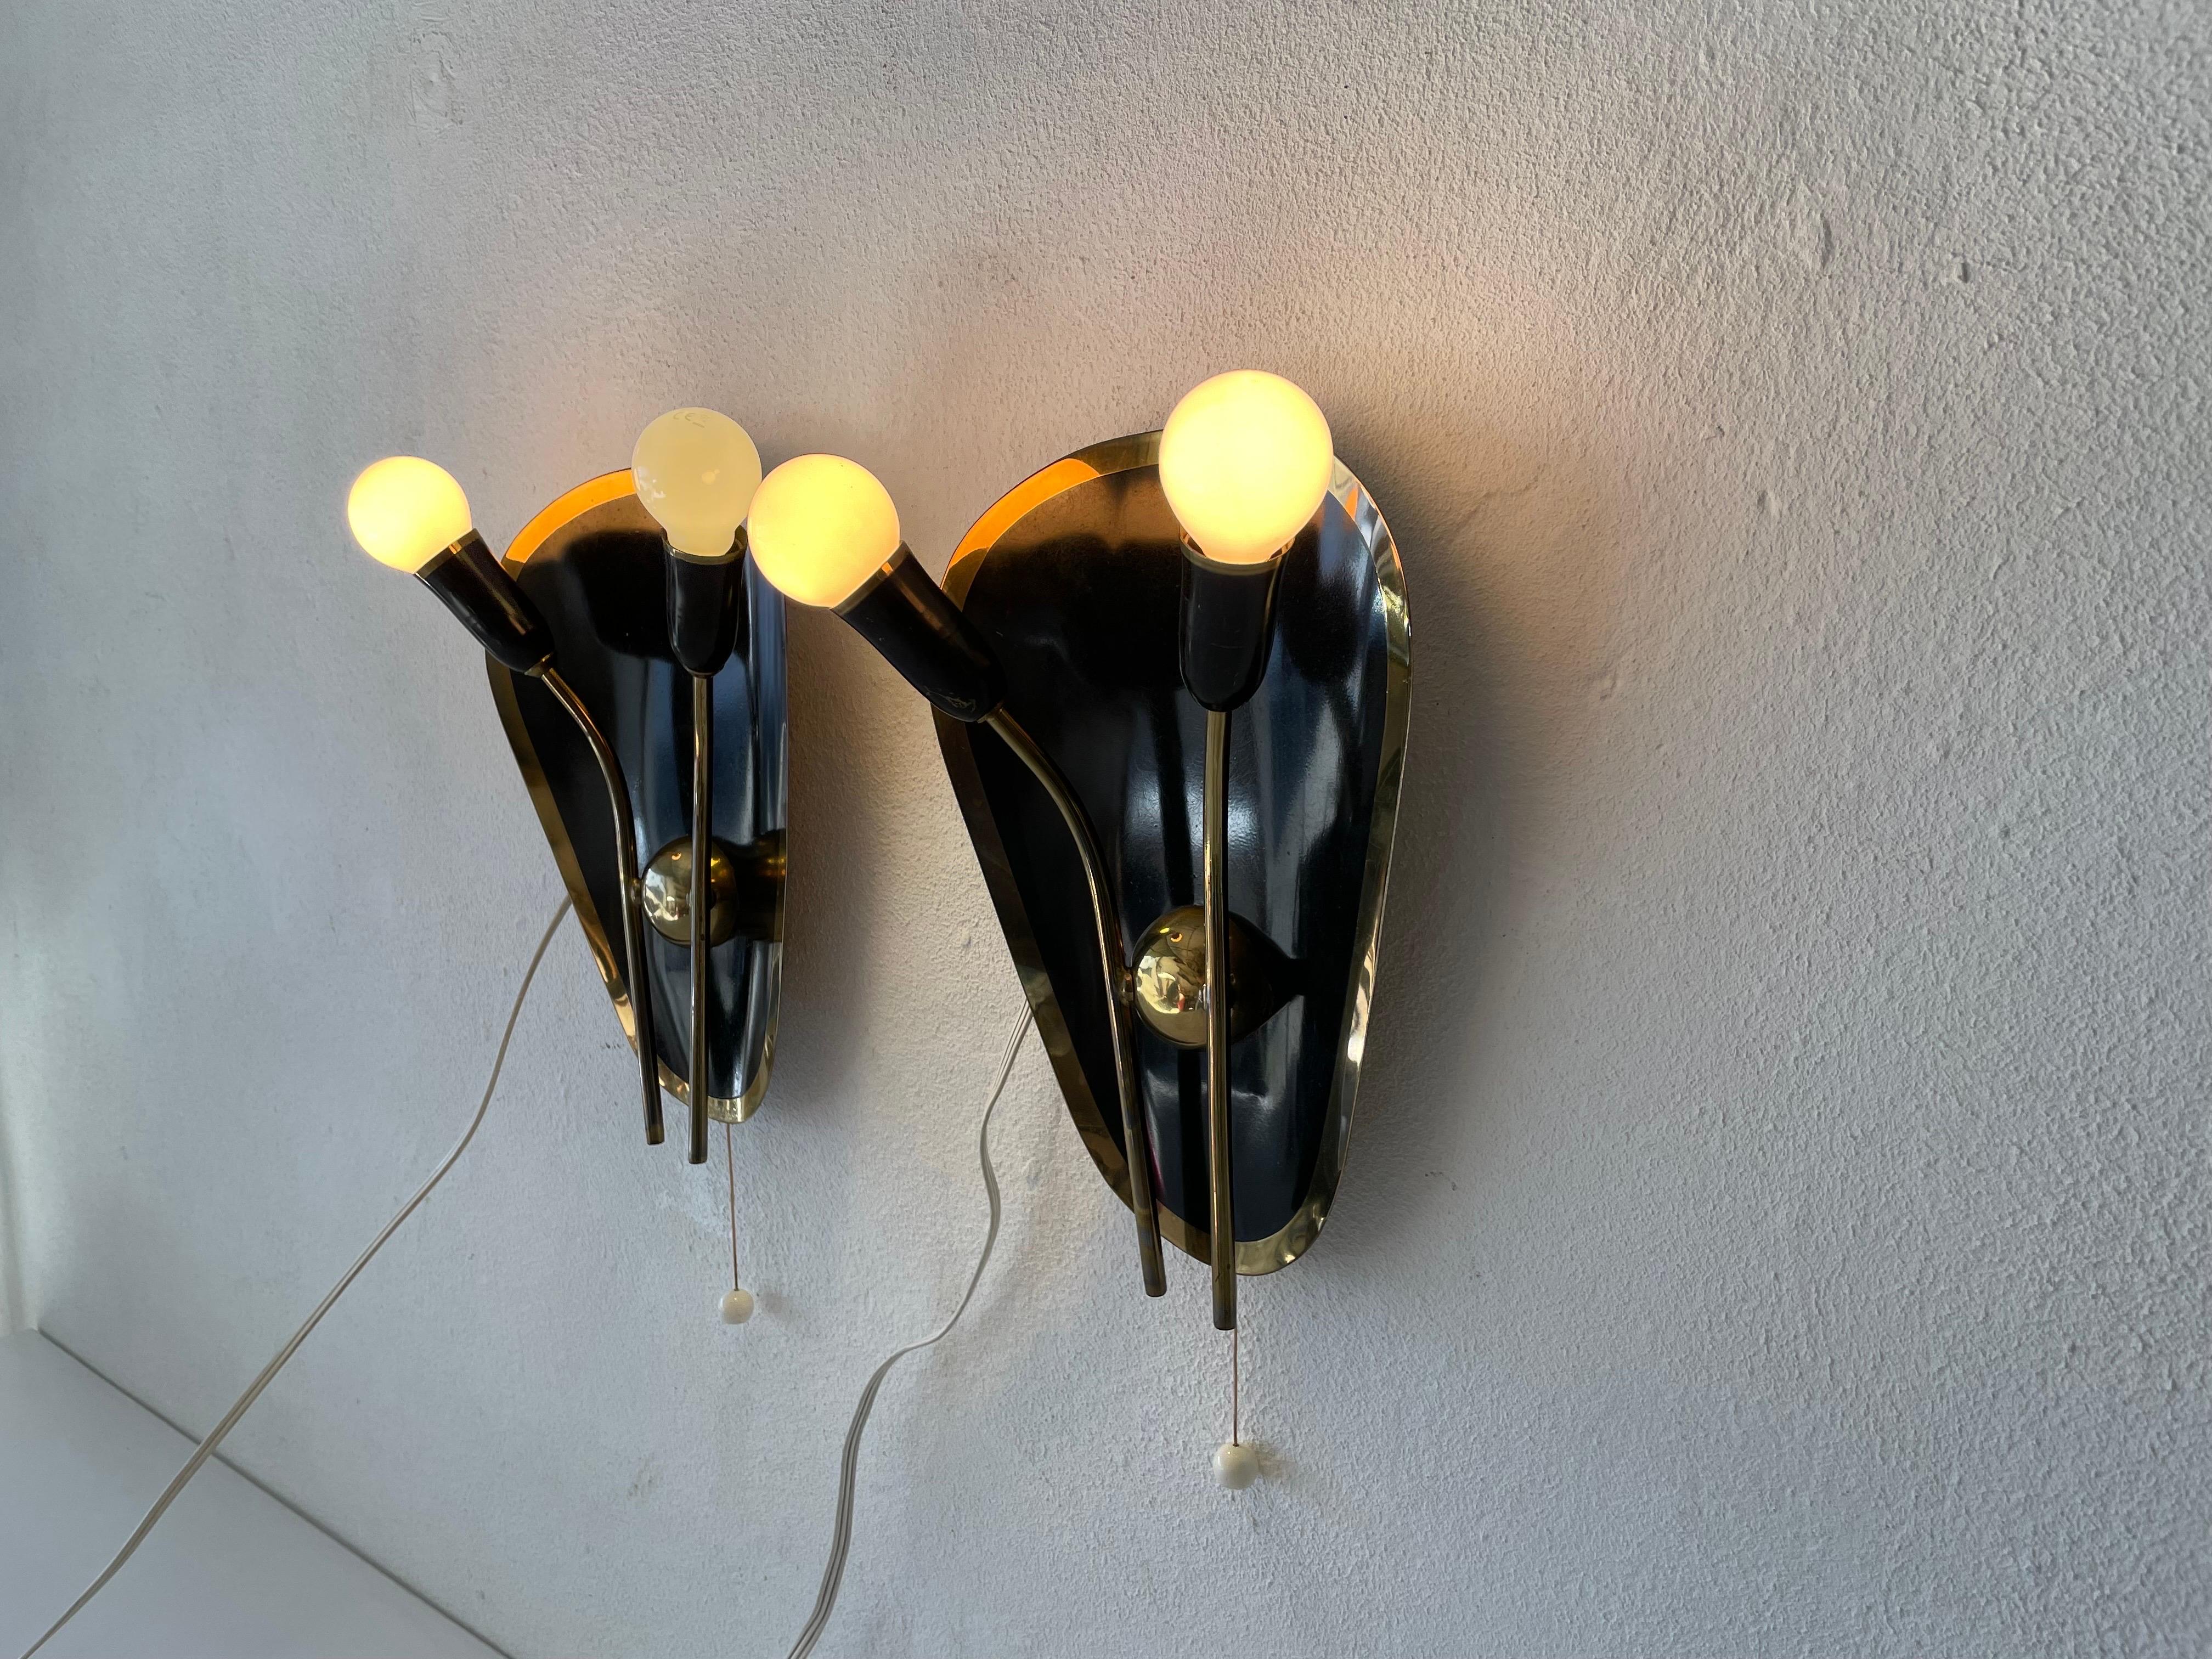 Exclusive Atomic Design Brass Black Metal Pair of Sconces, 1950s, Germany For Sale 7